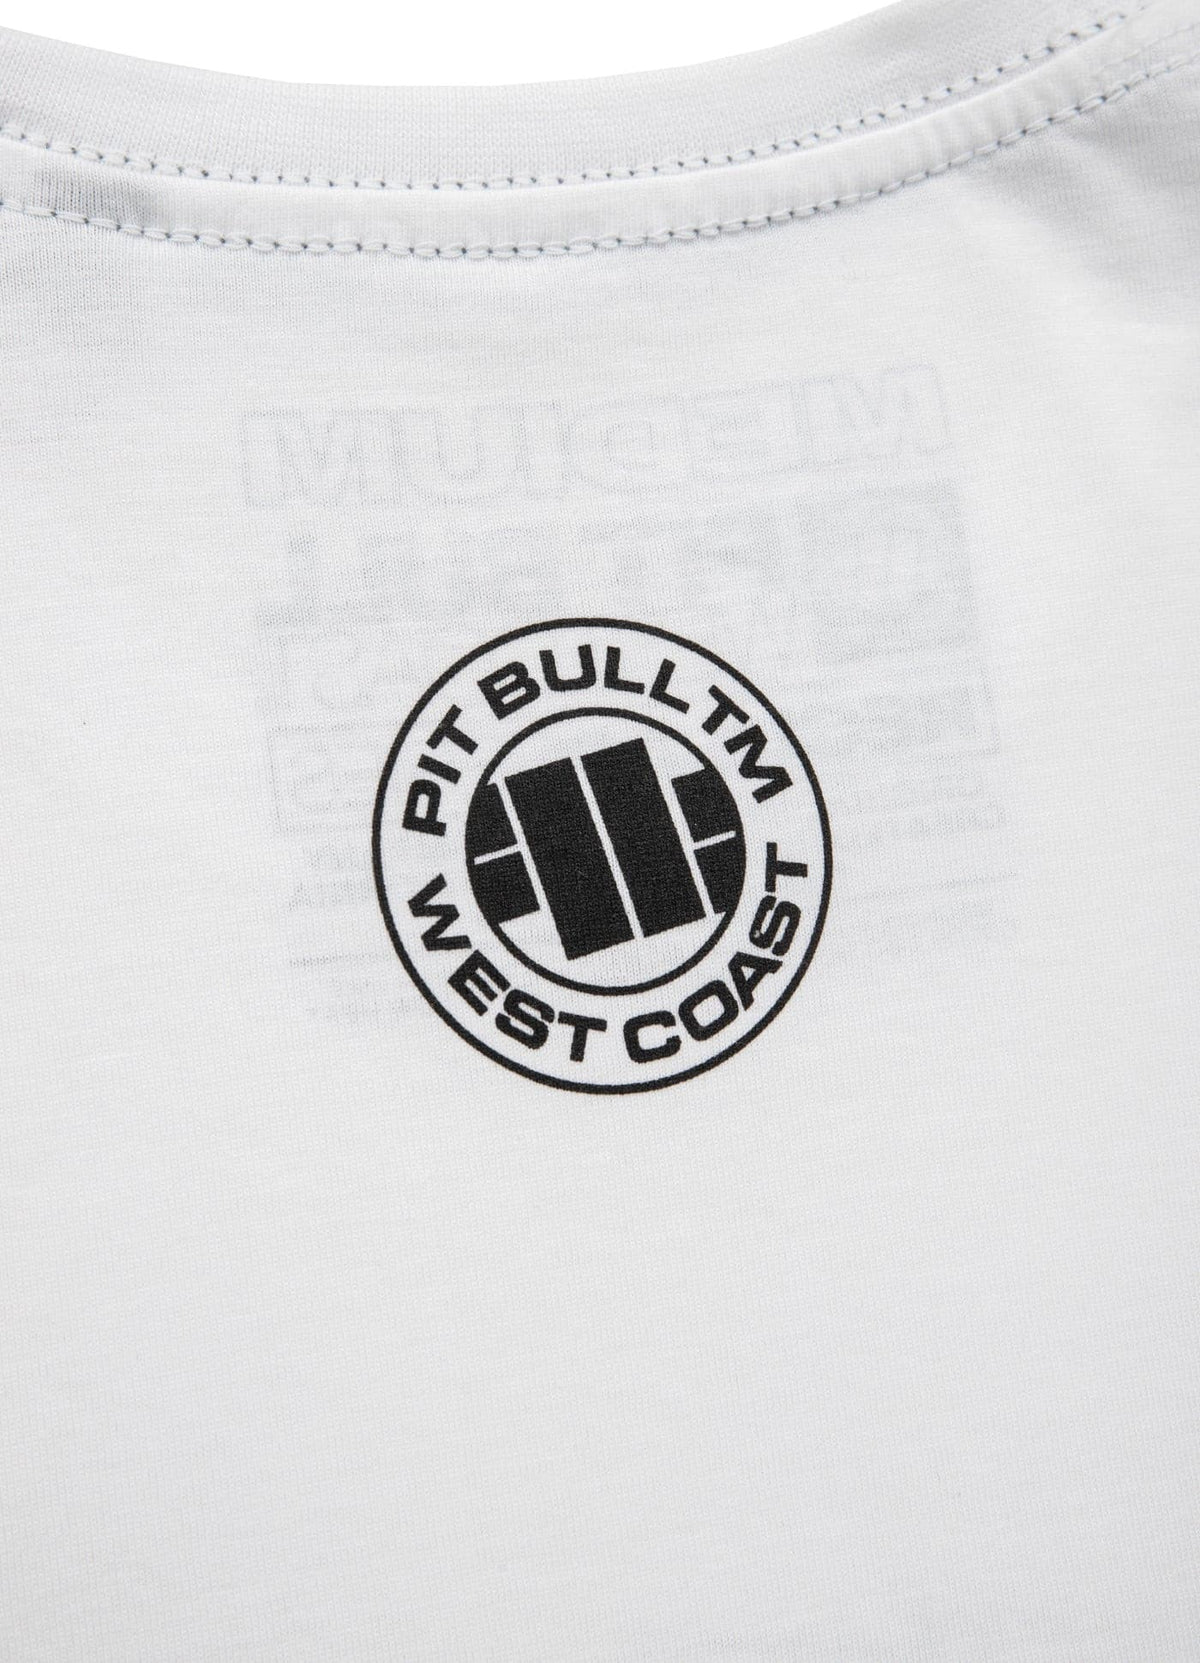 Official ADCC White T-Shirt.